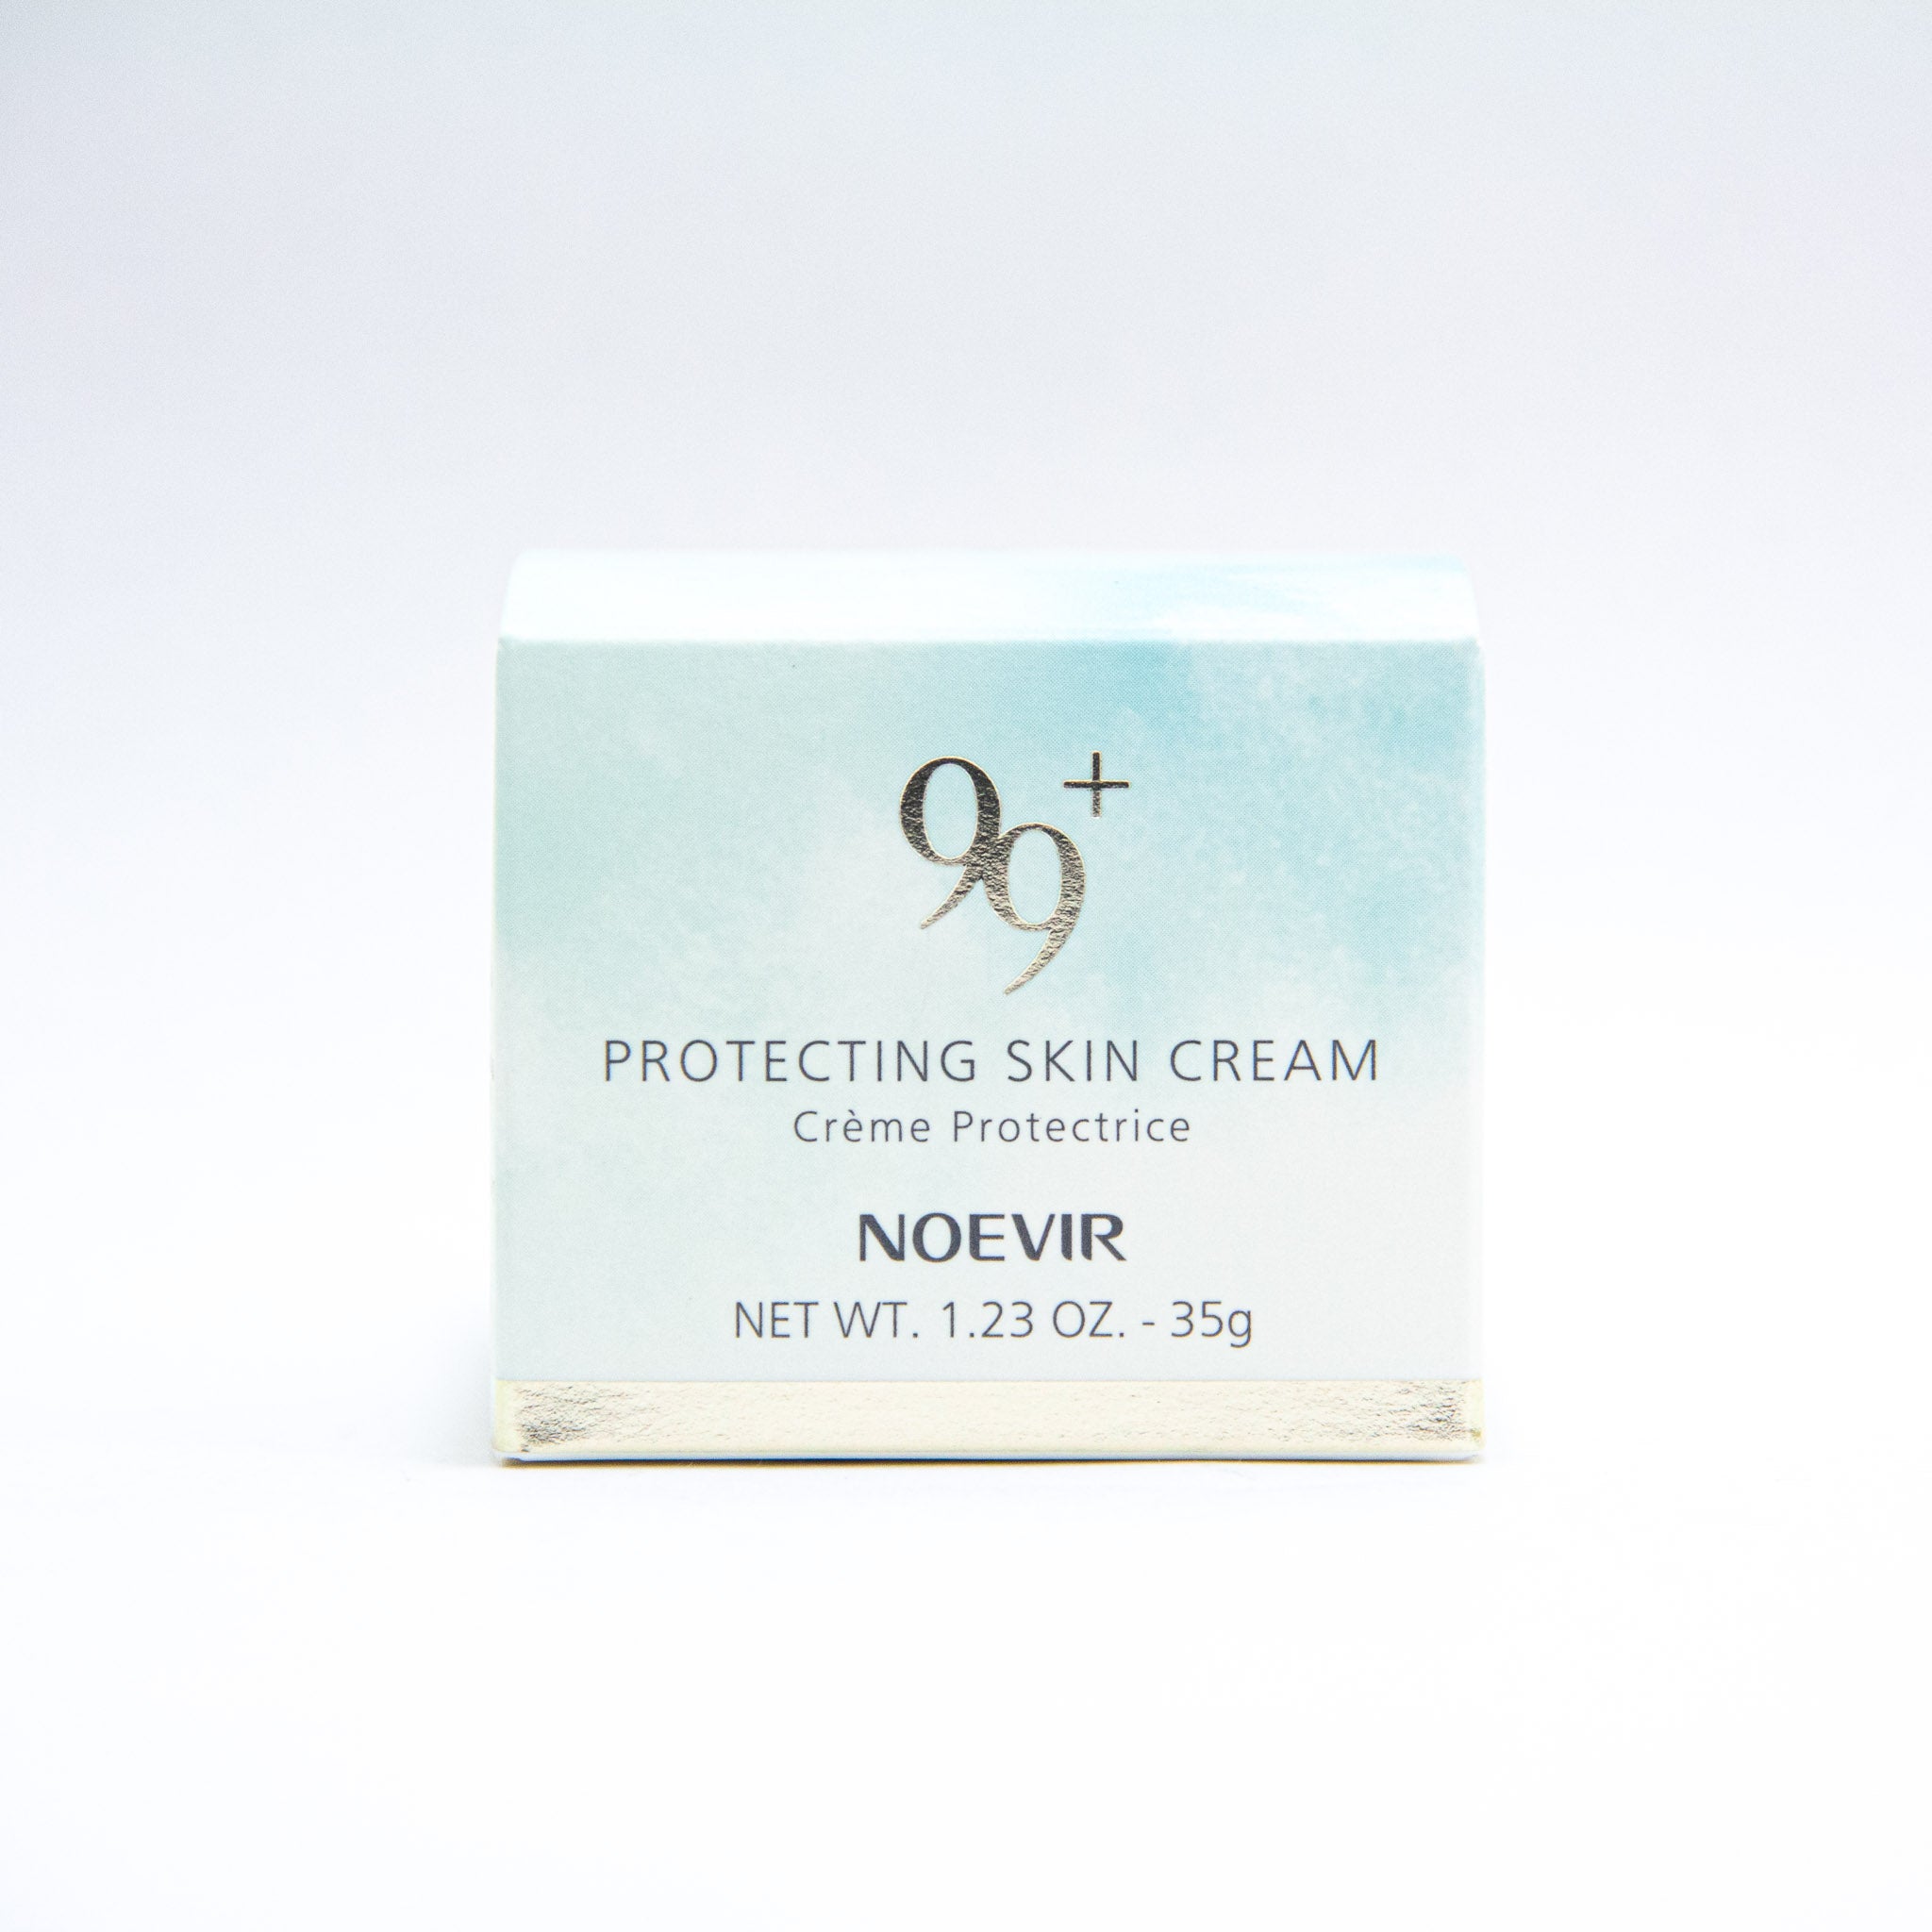 Noevir 99+ Protecting Skin Cream, 1.23 oz:   This cream seals in moisture and protects against dehydration, while allowing skin to breathe. Makes skin supple and provides a smoother surface for makeup application.